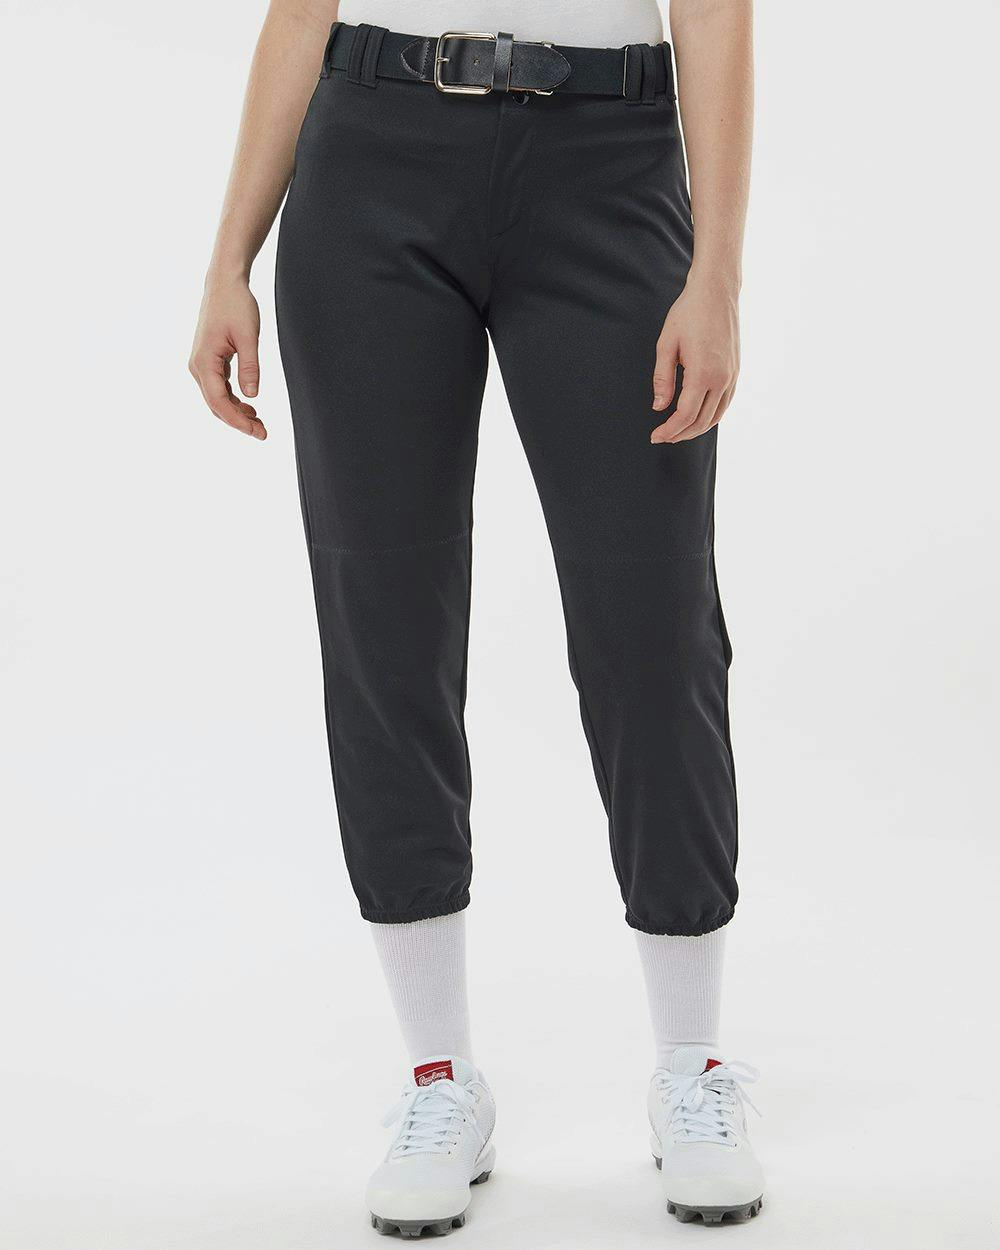 Image for Women's Belt Loop Fast-Pitch Pants - 605PBW